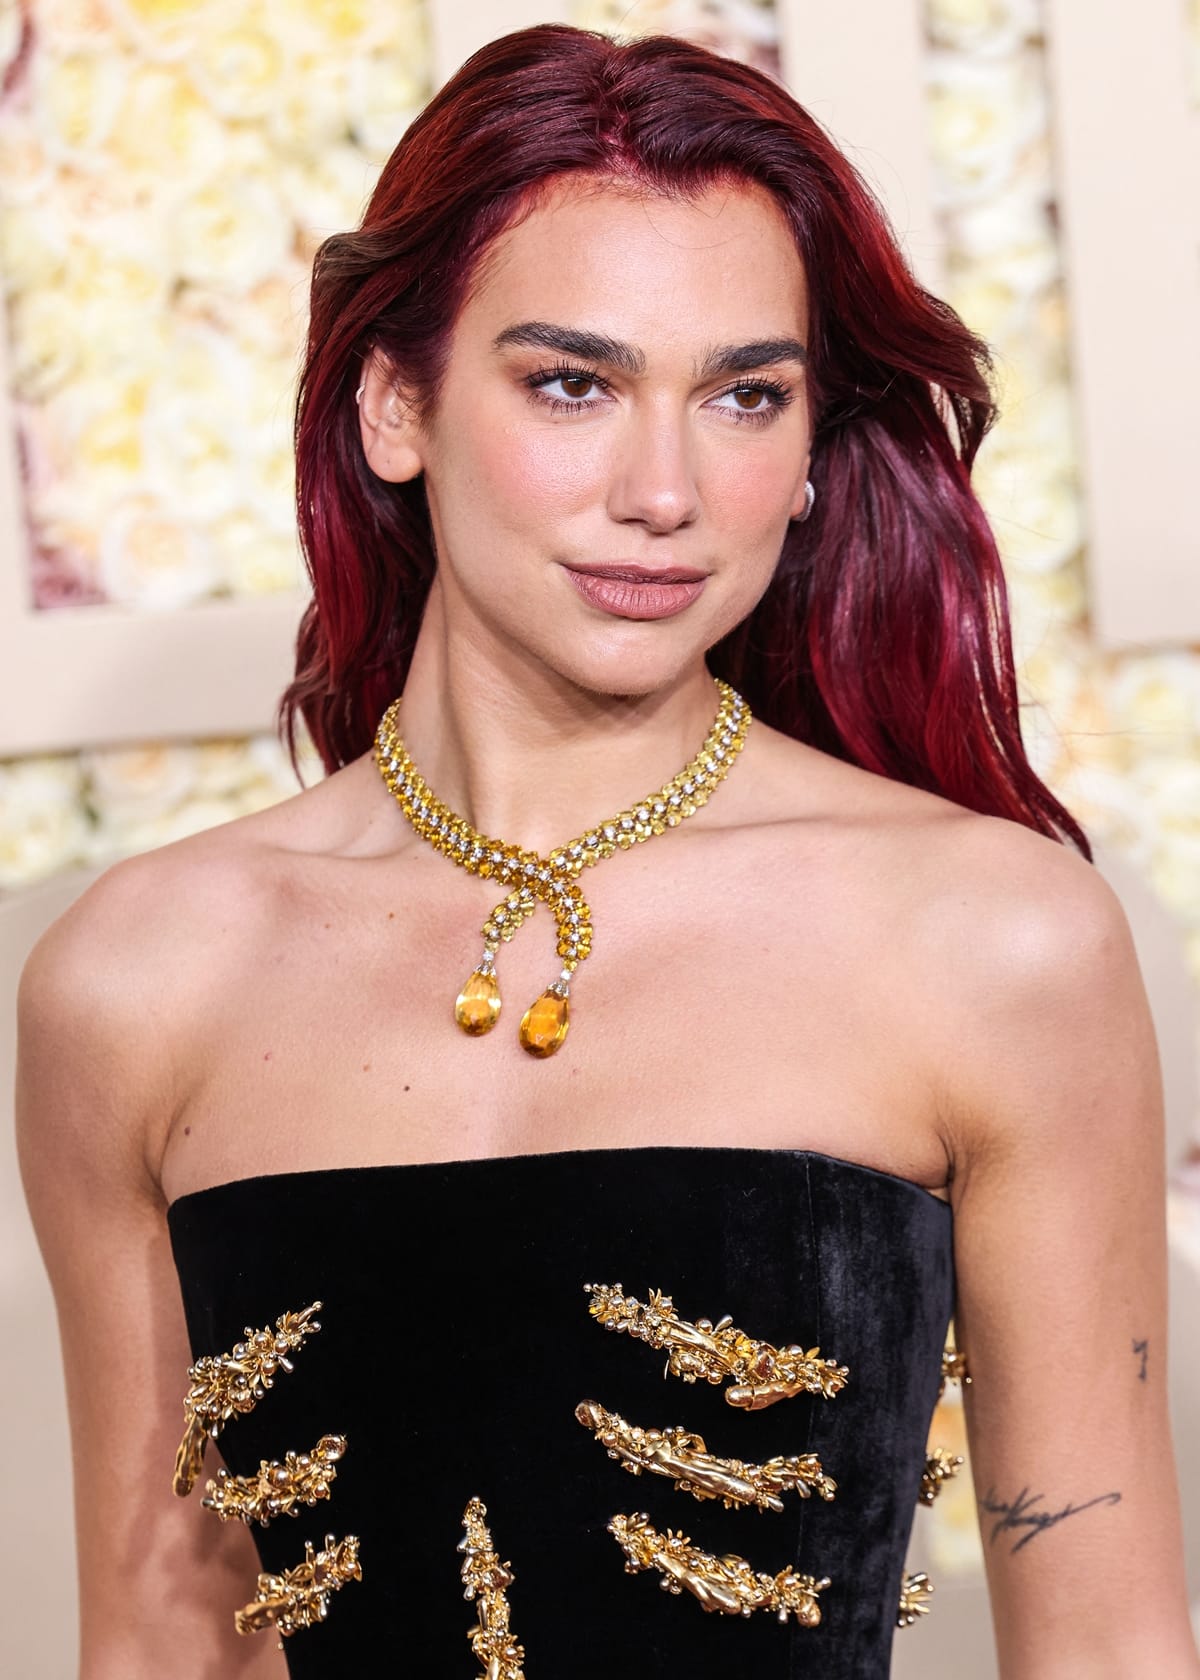  Complementing her Schiaparelli gown, Dua Lipa chose a vintage Tiffany & Co. necklace and a ring featuring a large yellow sapphire, adding a touch of timeless glamour to her ensemble